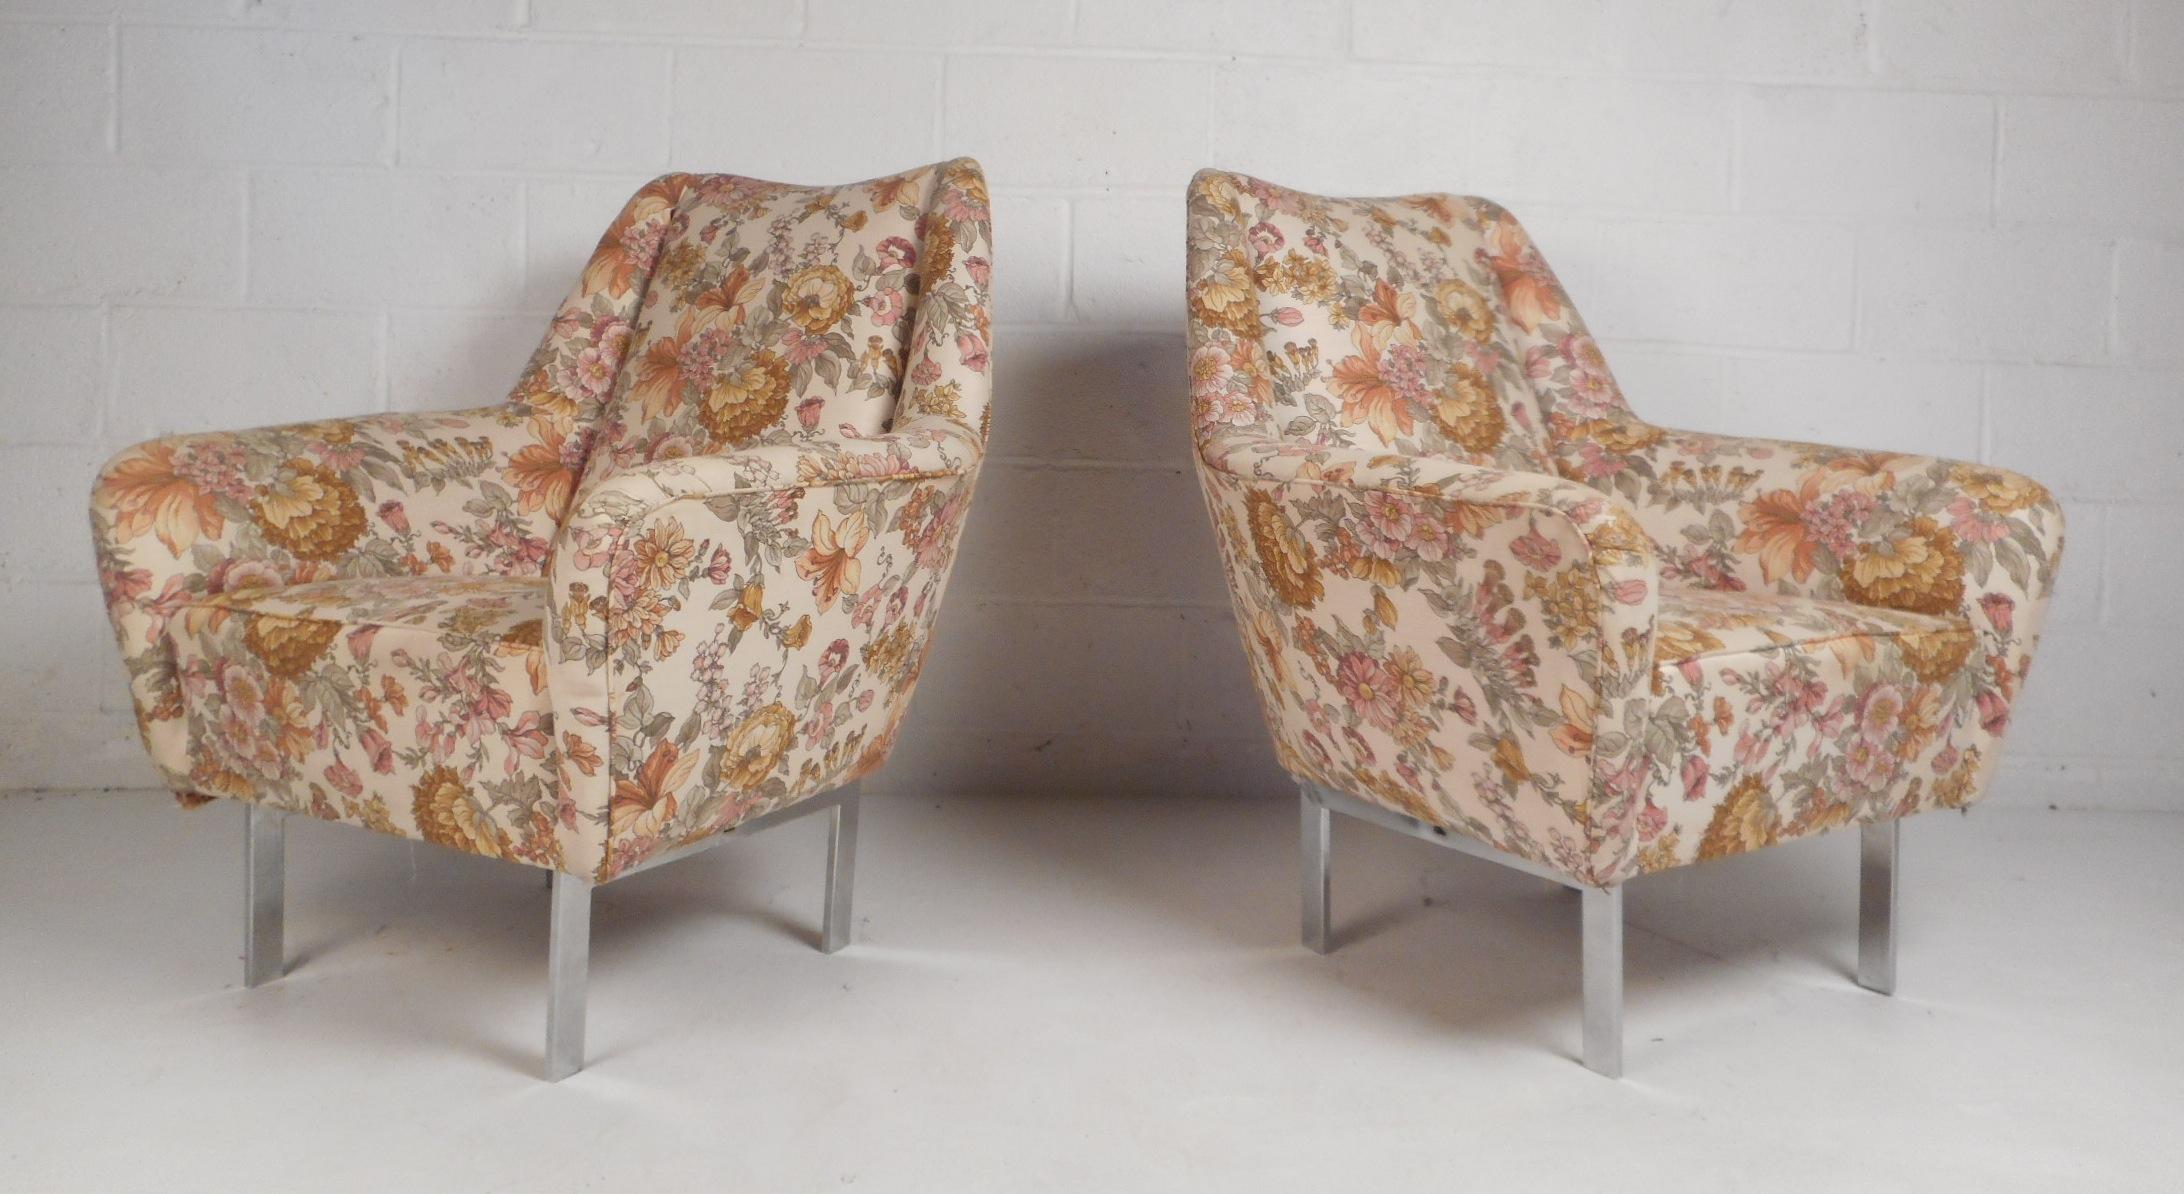 Pair of Mid-Century Modern Italian Lounge Chairs with Chrome Legs In Good Condition For Sale In Brooklyn, NY